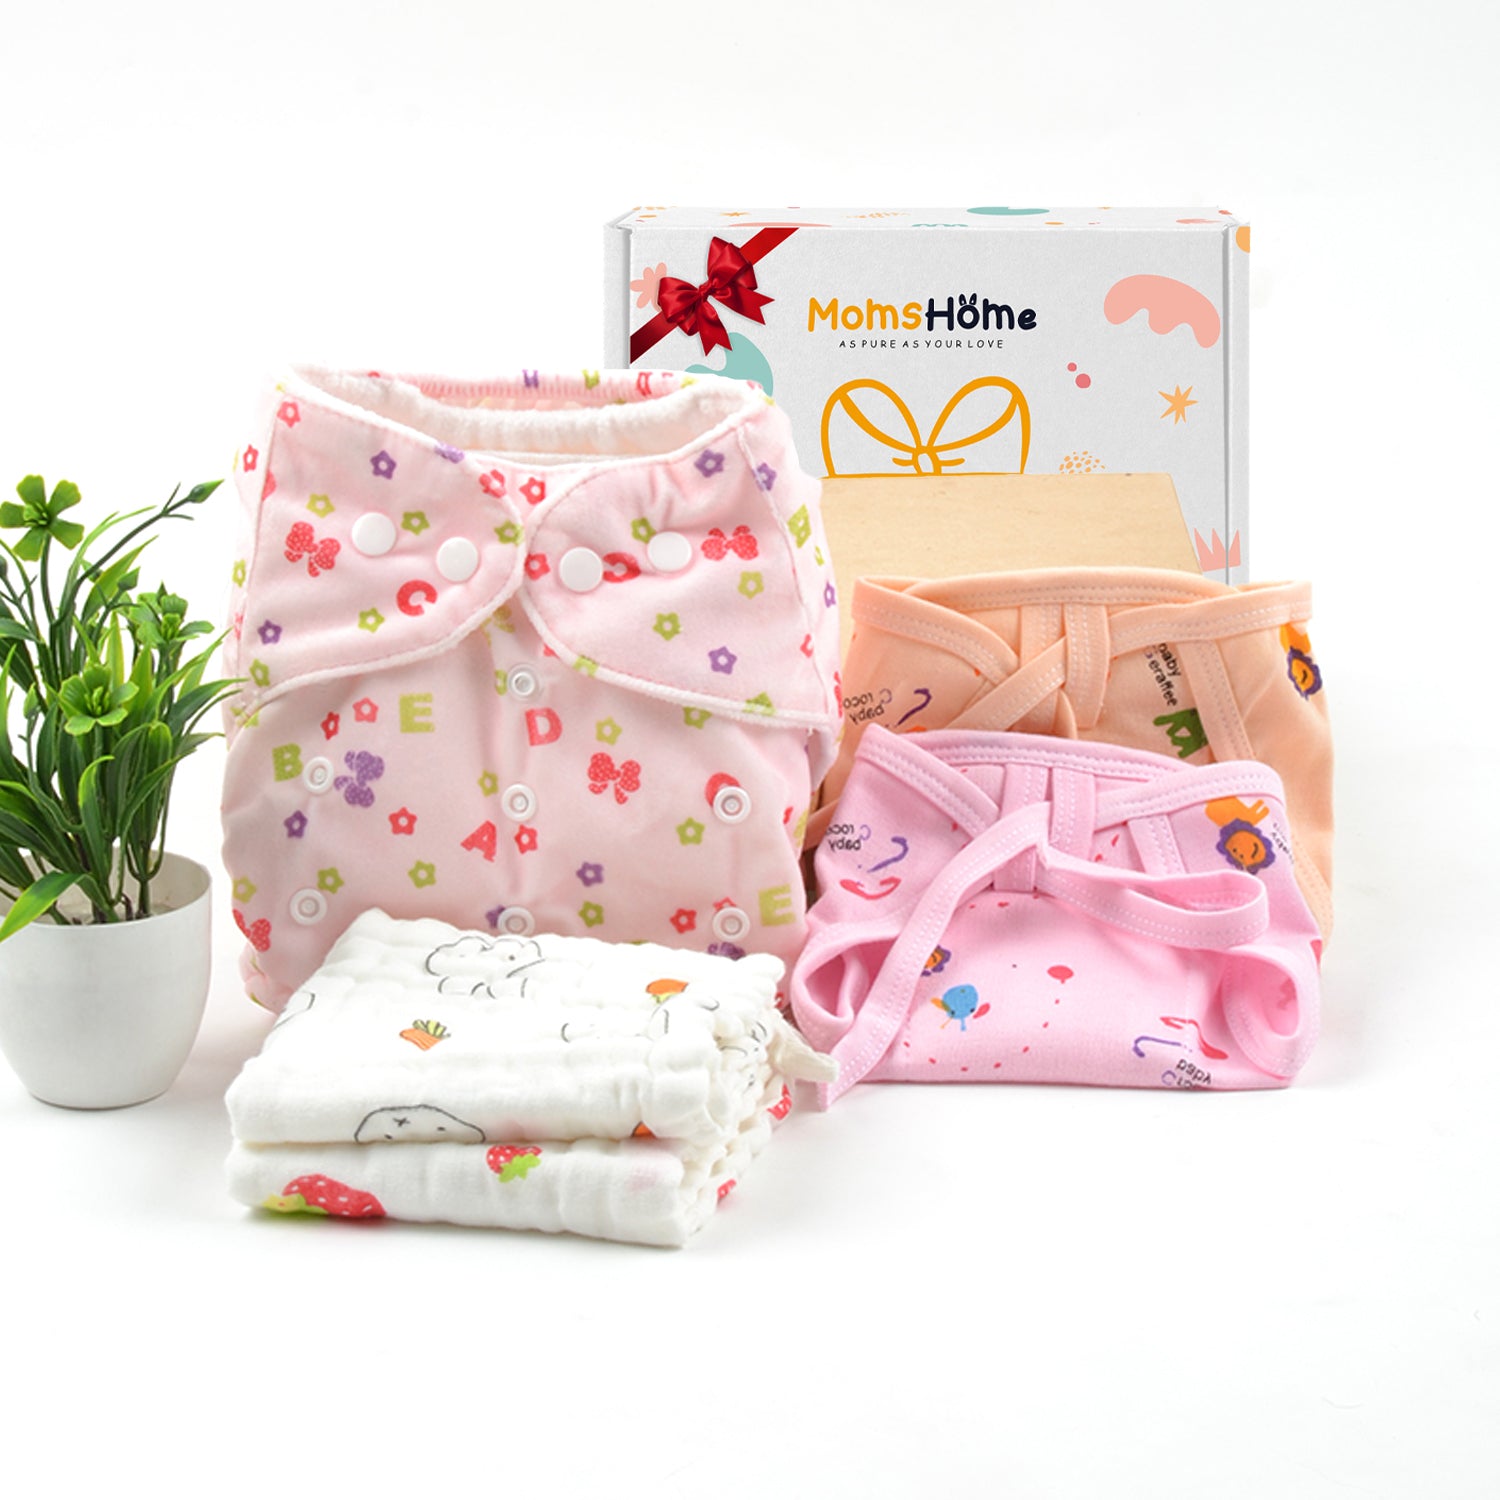 Moms Home New Born Organic Cotton Diaper Gift Set of 6 Items